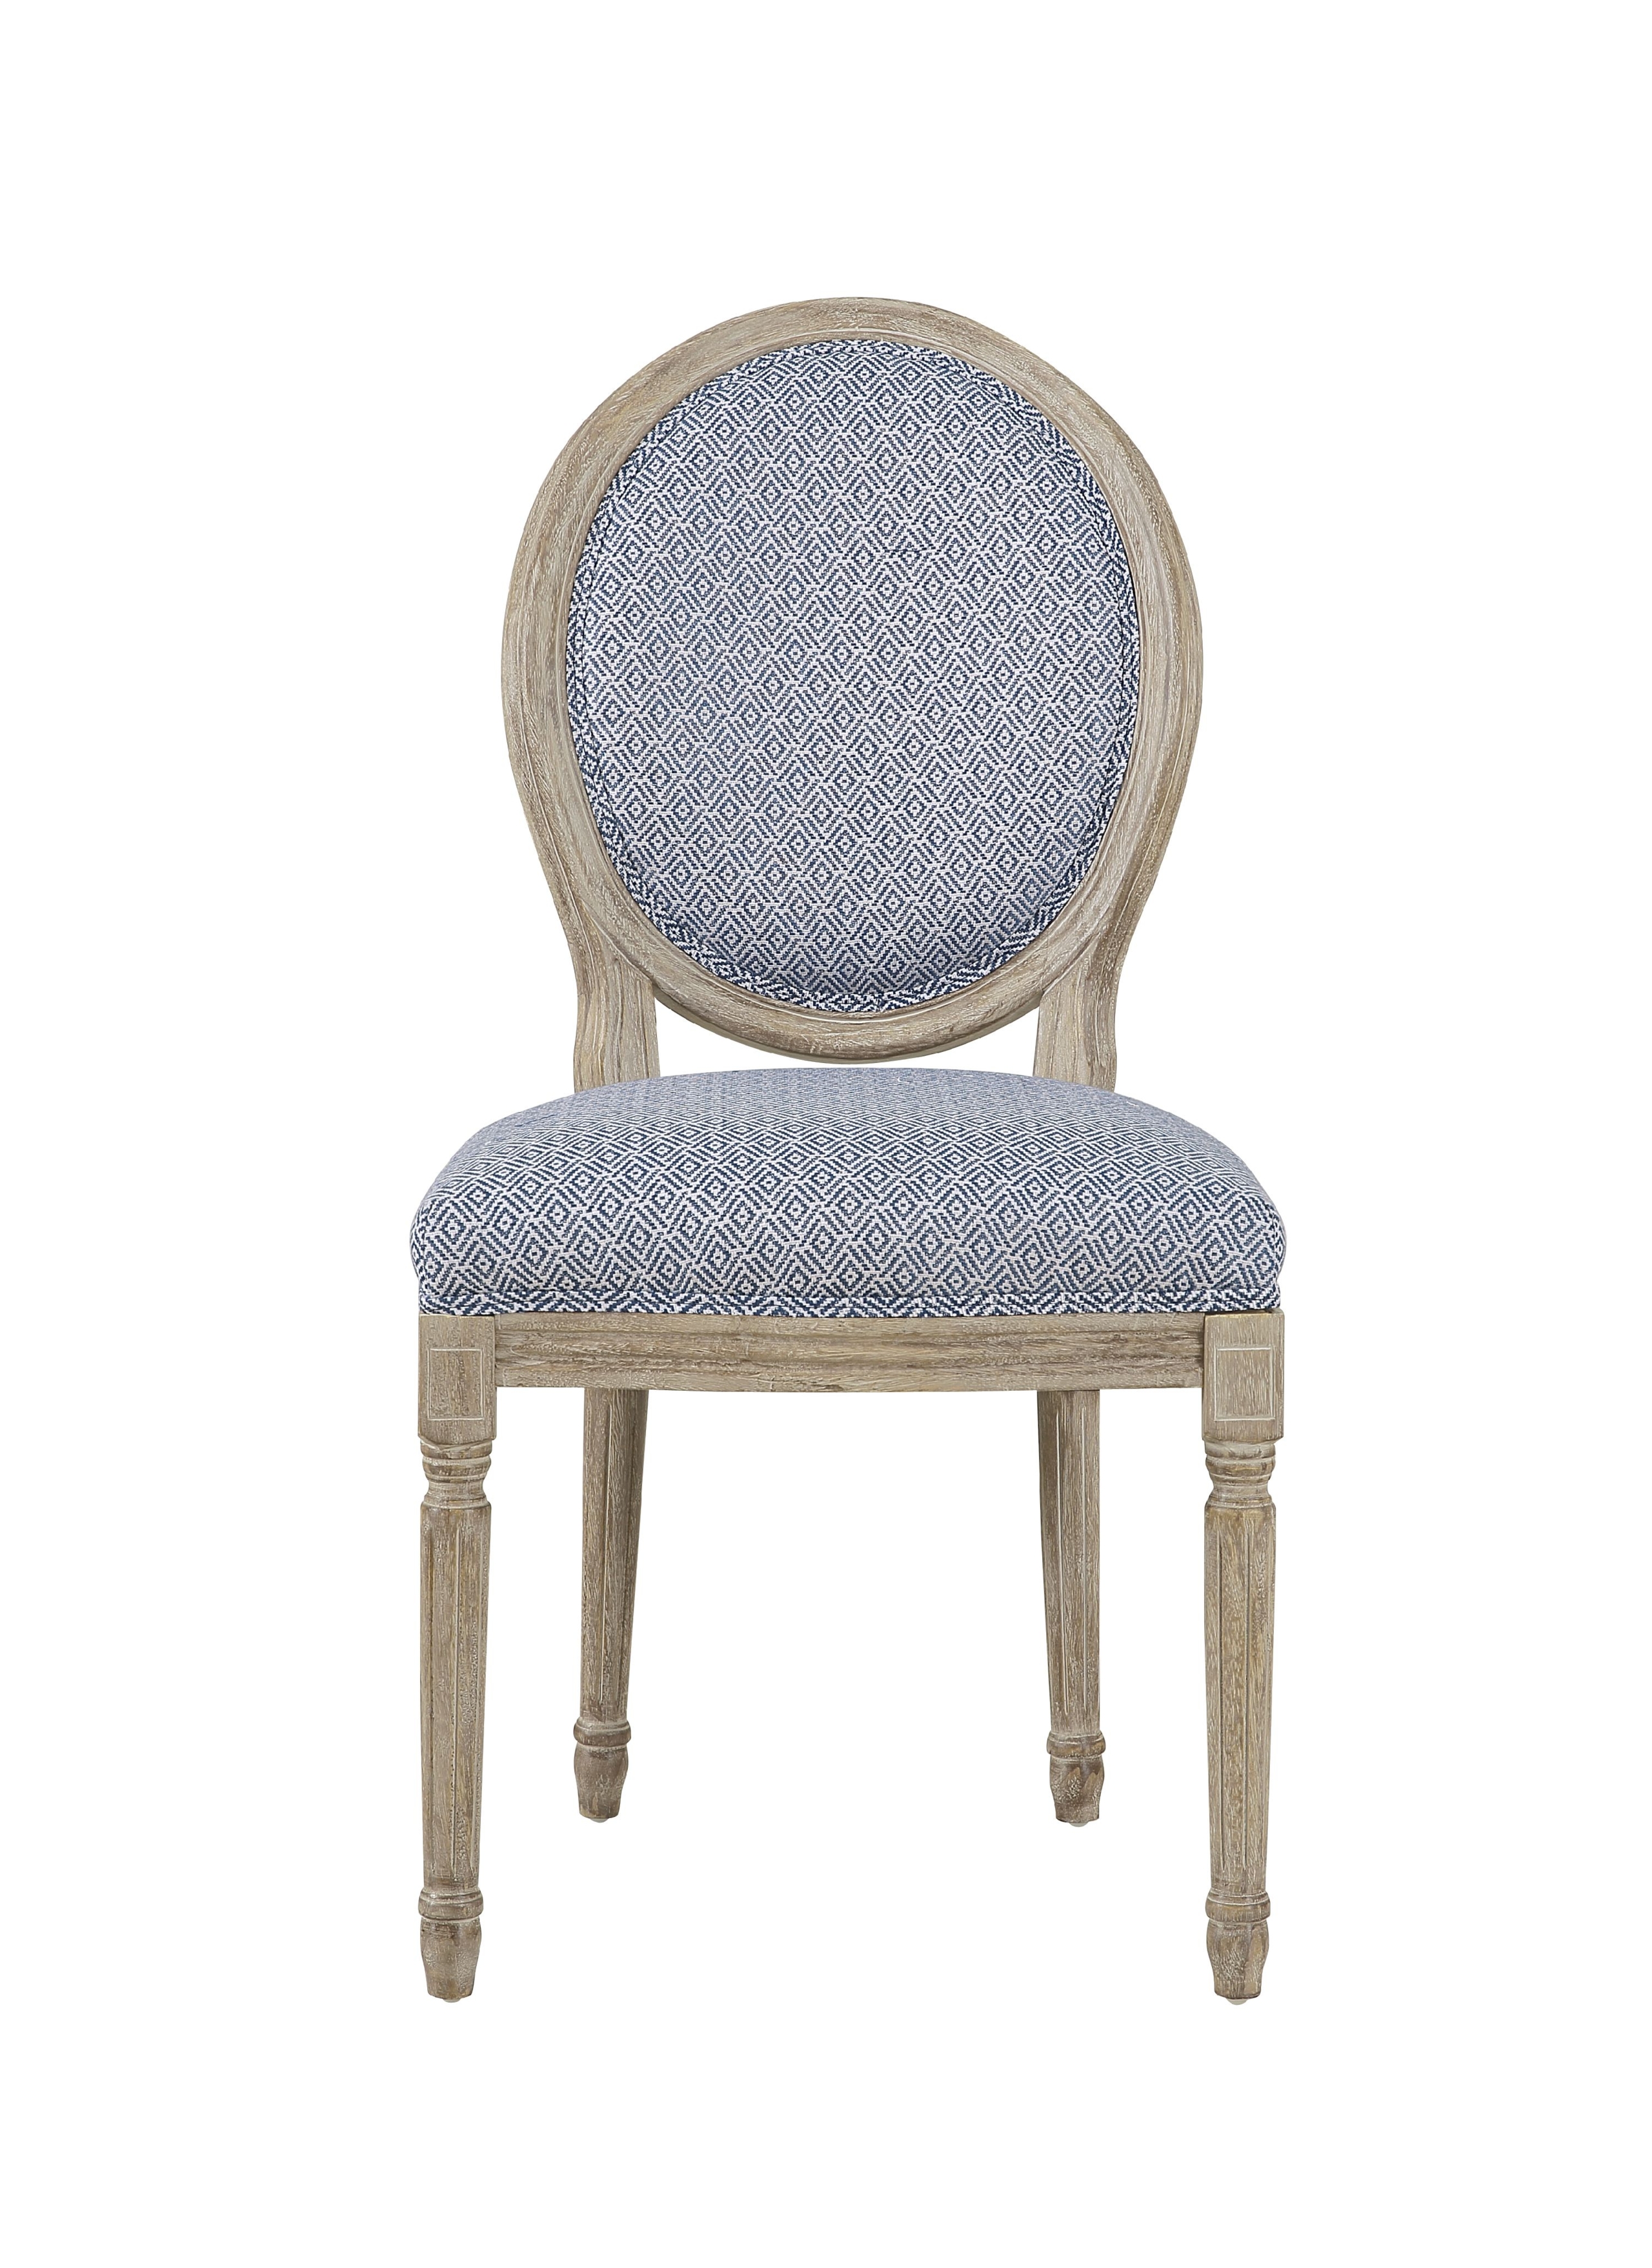 Round Back Dining Chairs Visualhunt, Round Back Dining Chairs Upholstered